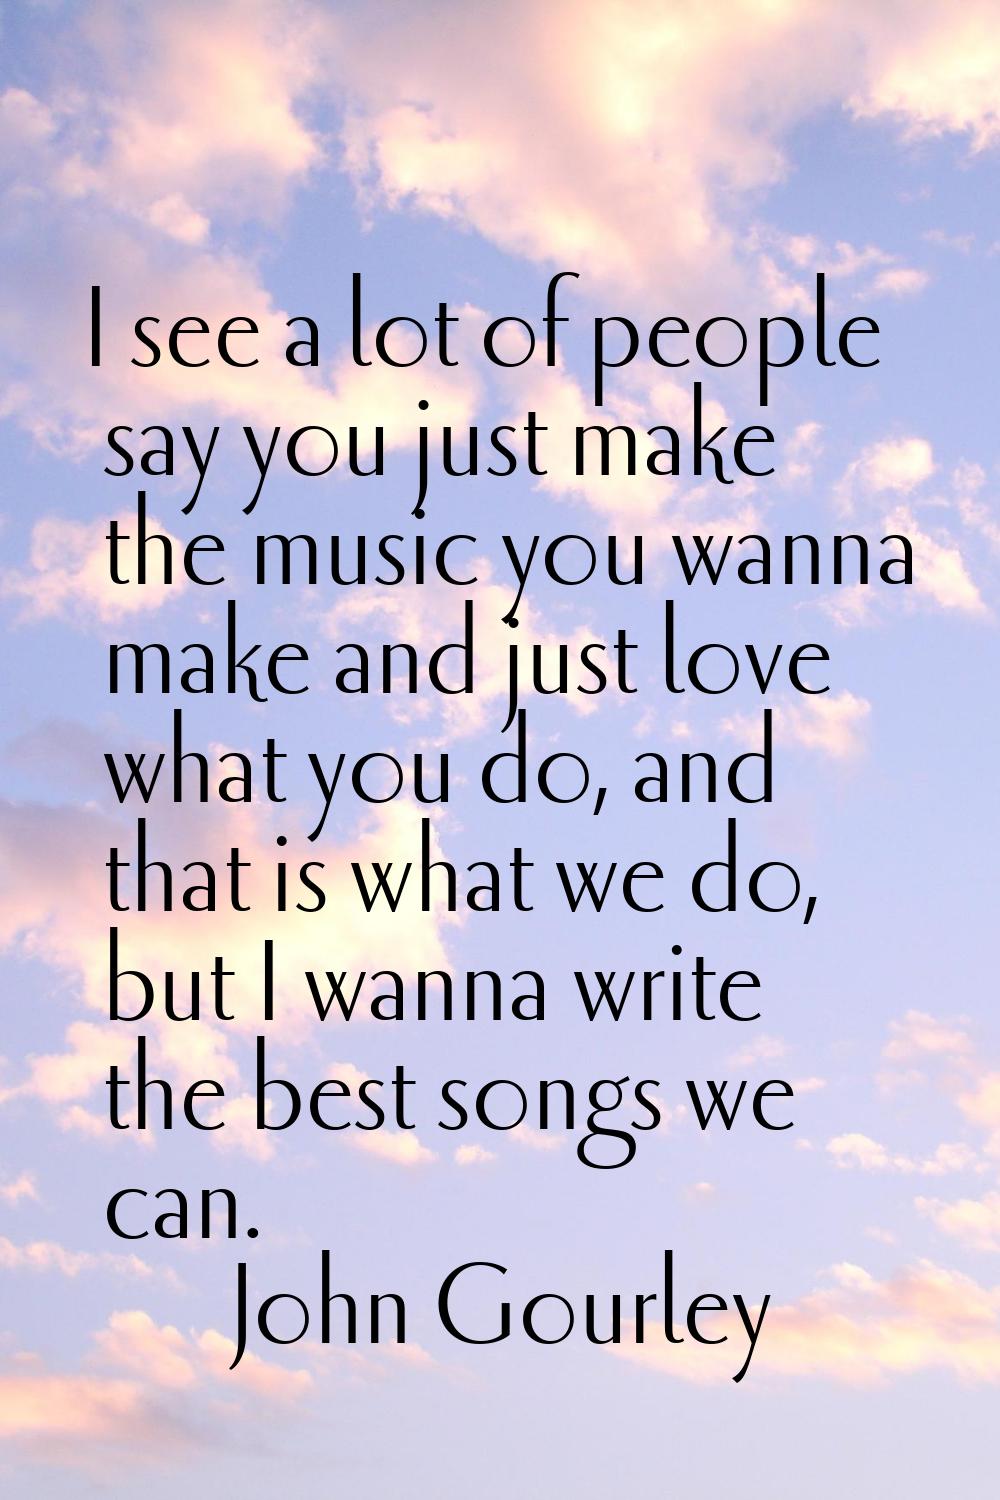 I see a lot of people say you just make the music you wanna make and just love what you do, and tha